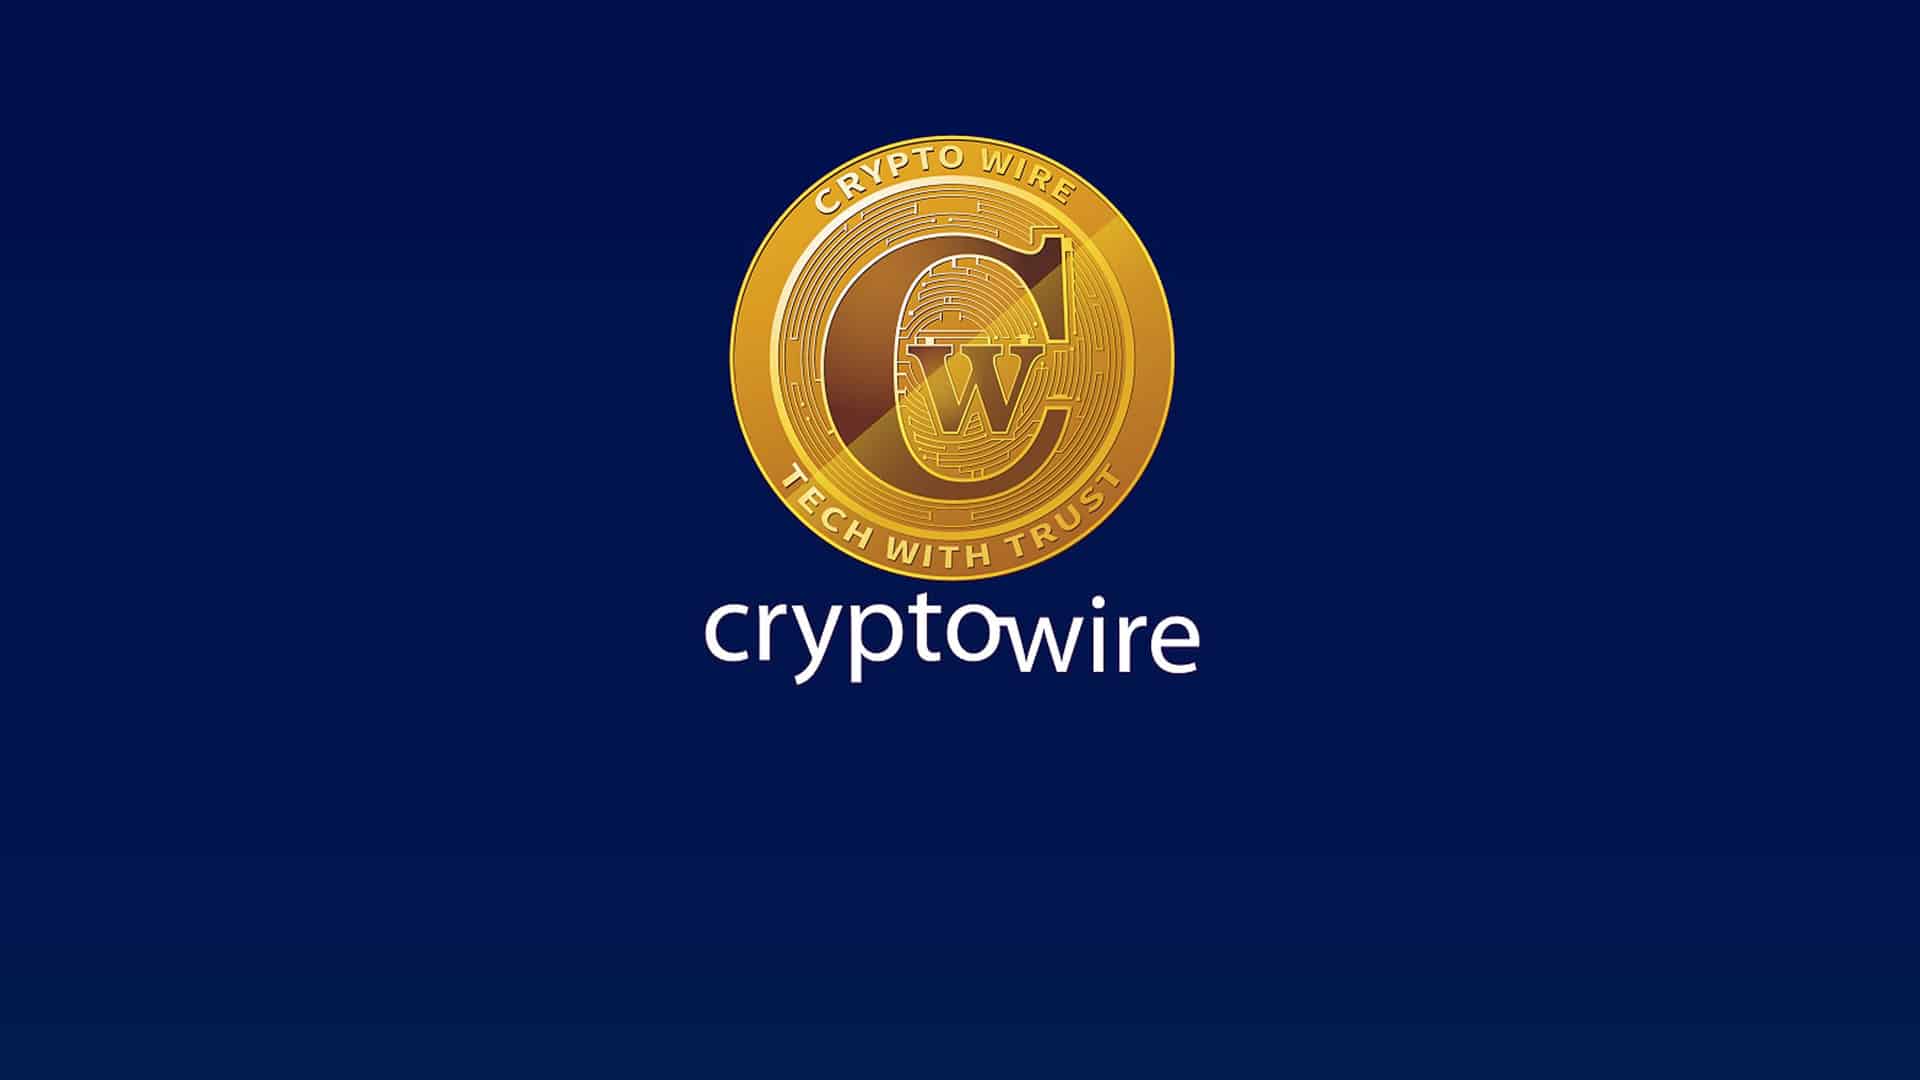 CryptoWire rolls out global index 'Cryptocurrencies IC15'